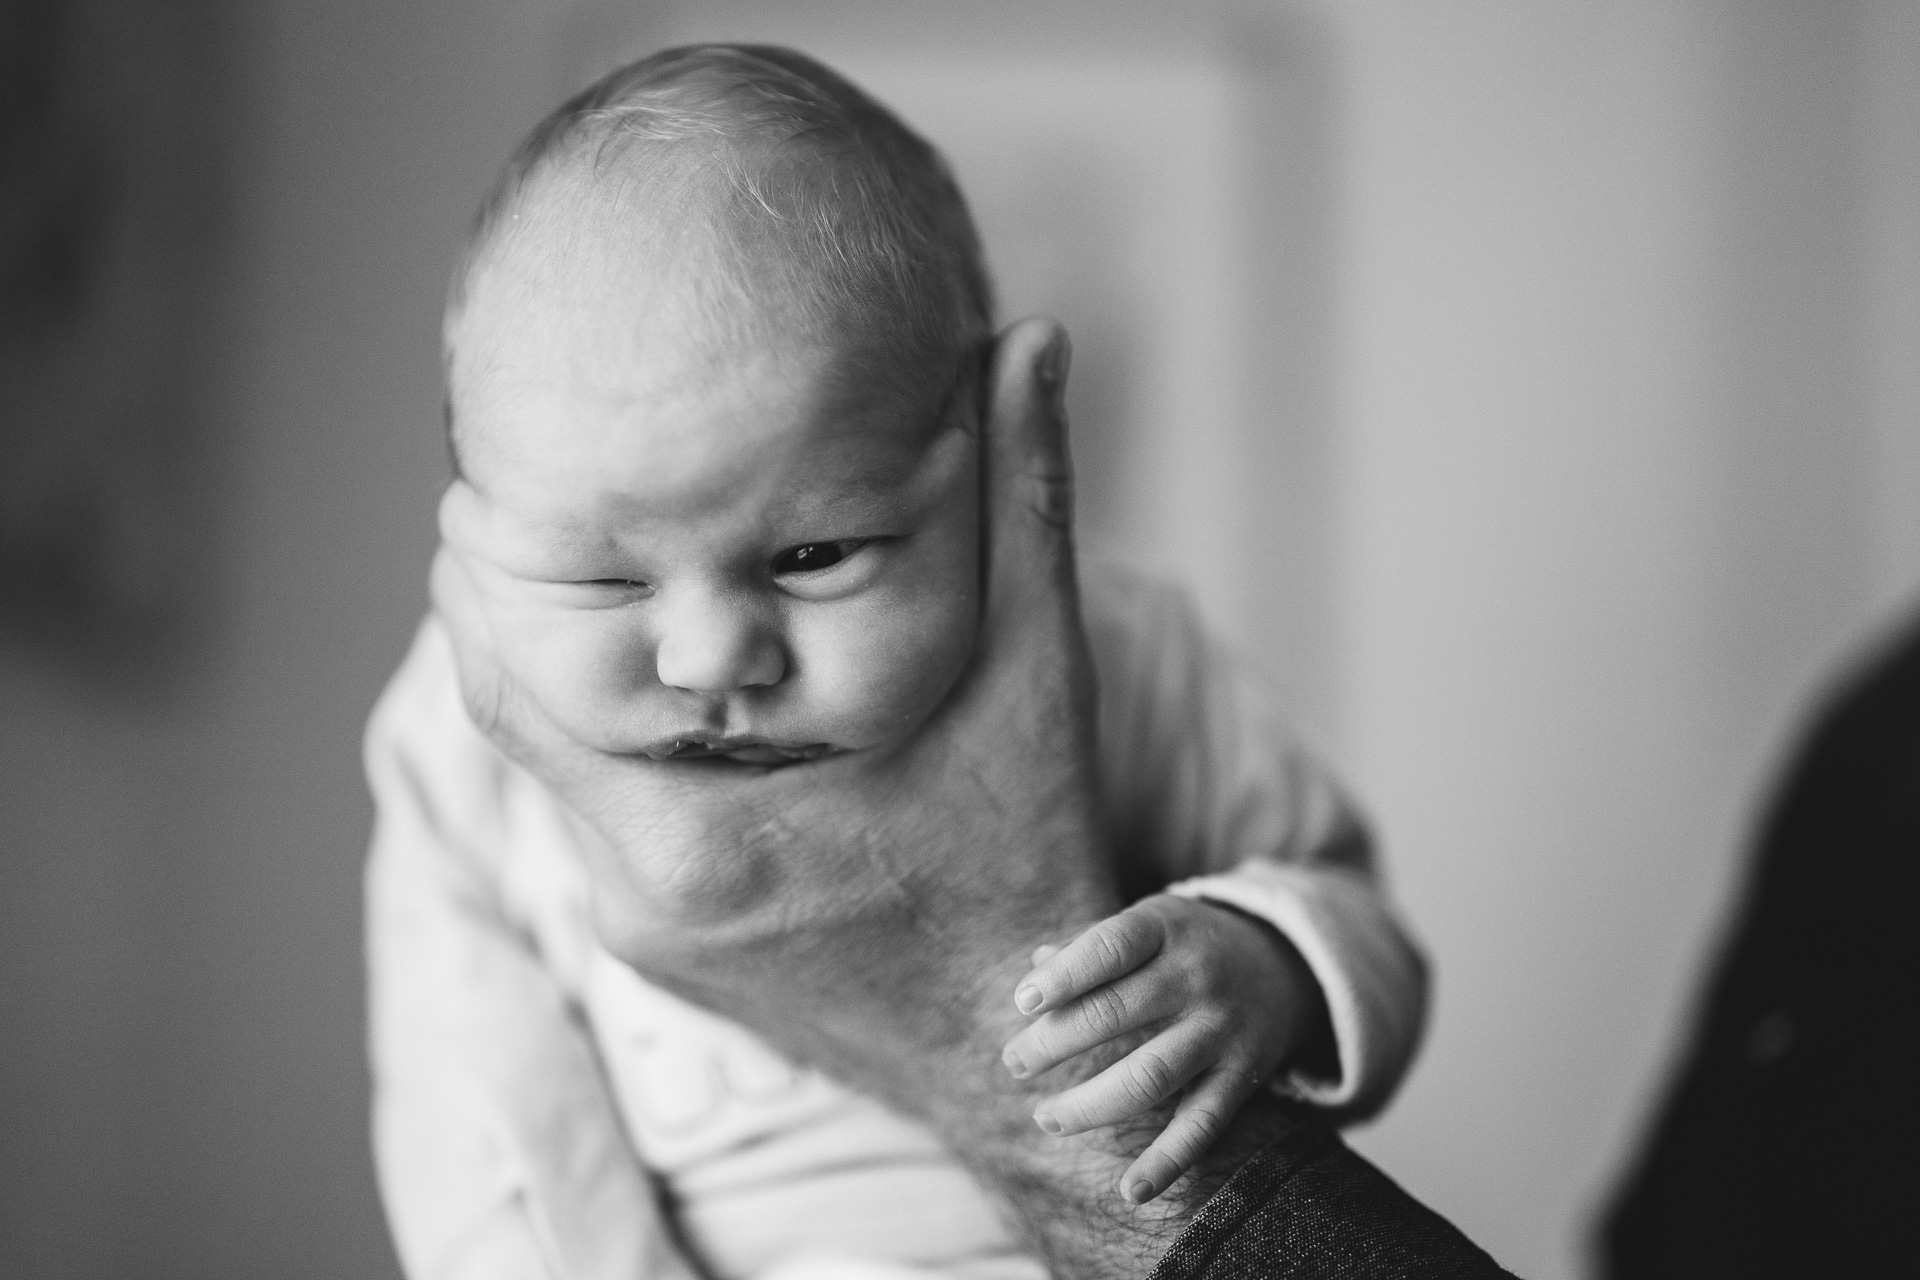 A newborn baby held in father's hands during a newborn photography session in Devon